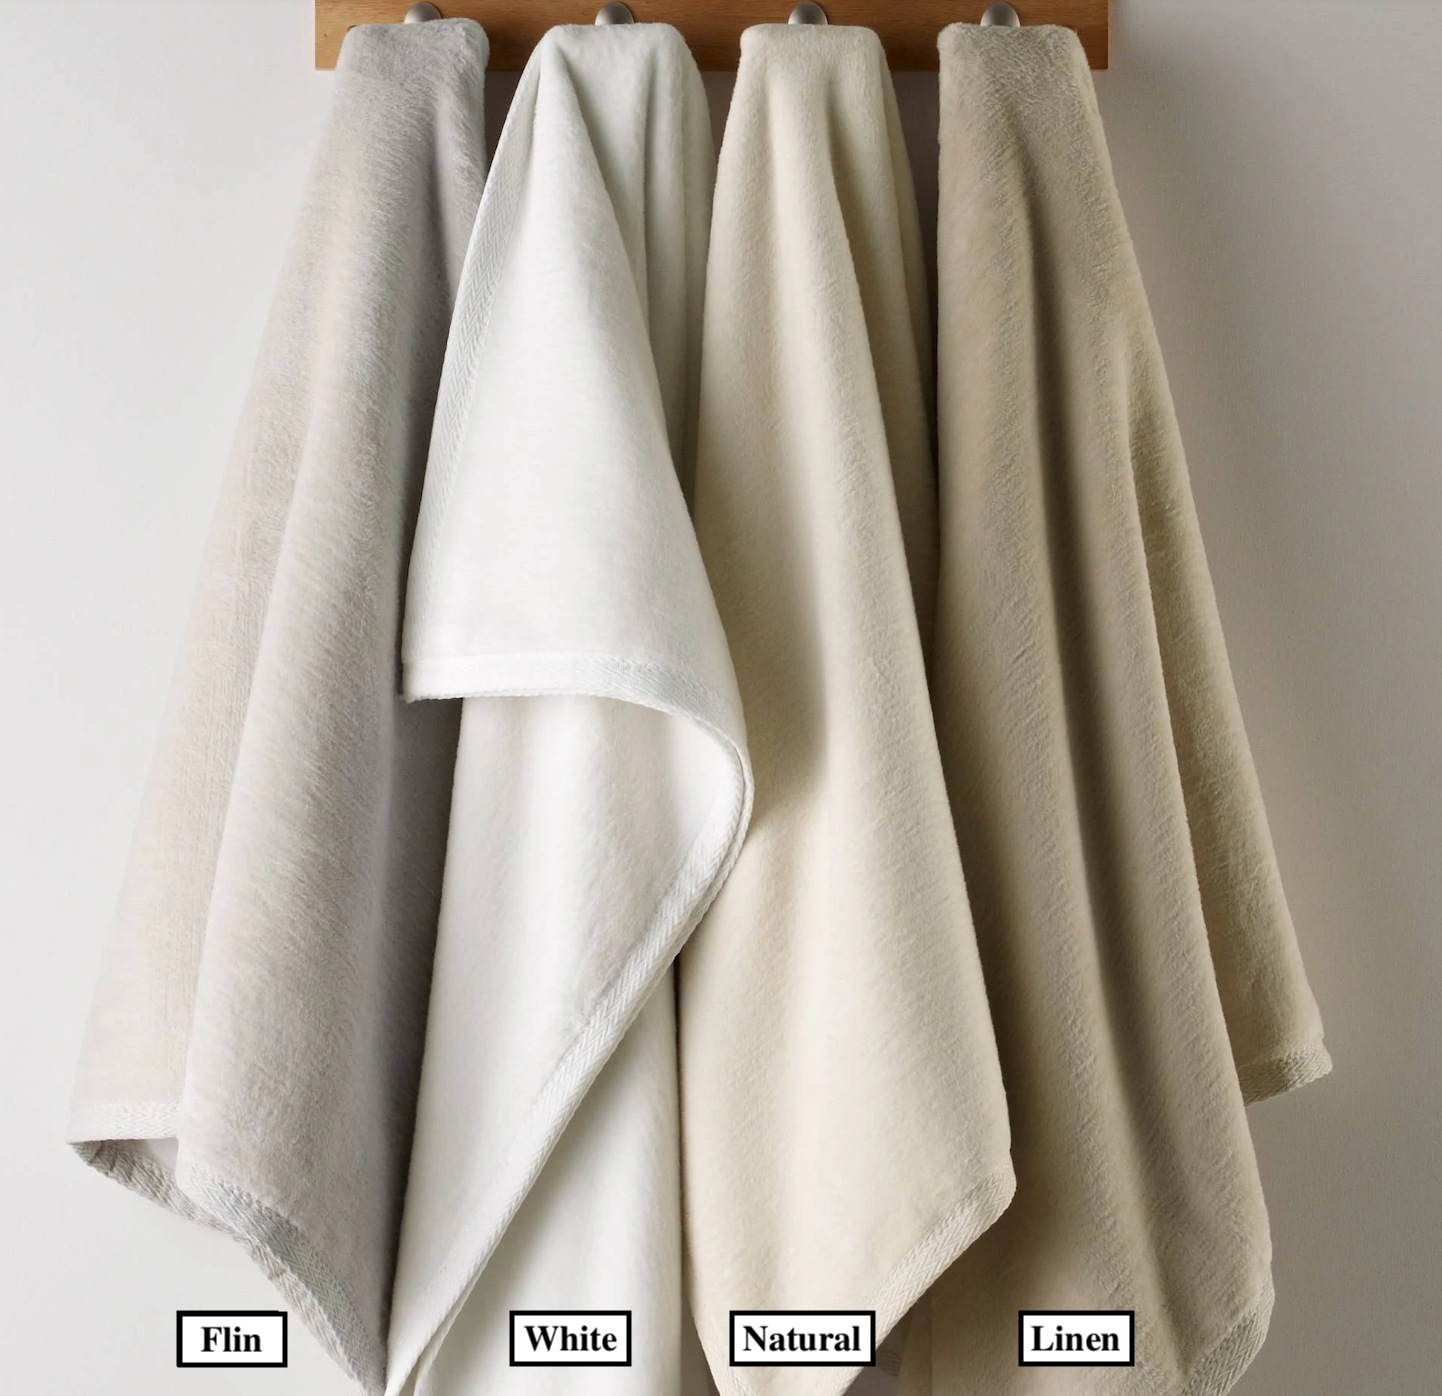 All Seasons cotton blankets by Peacock Alley